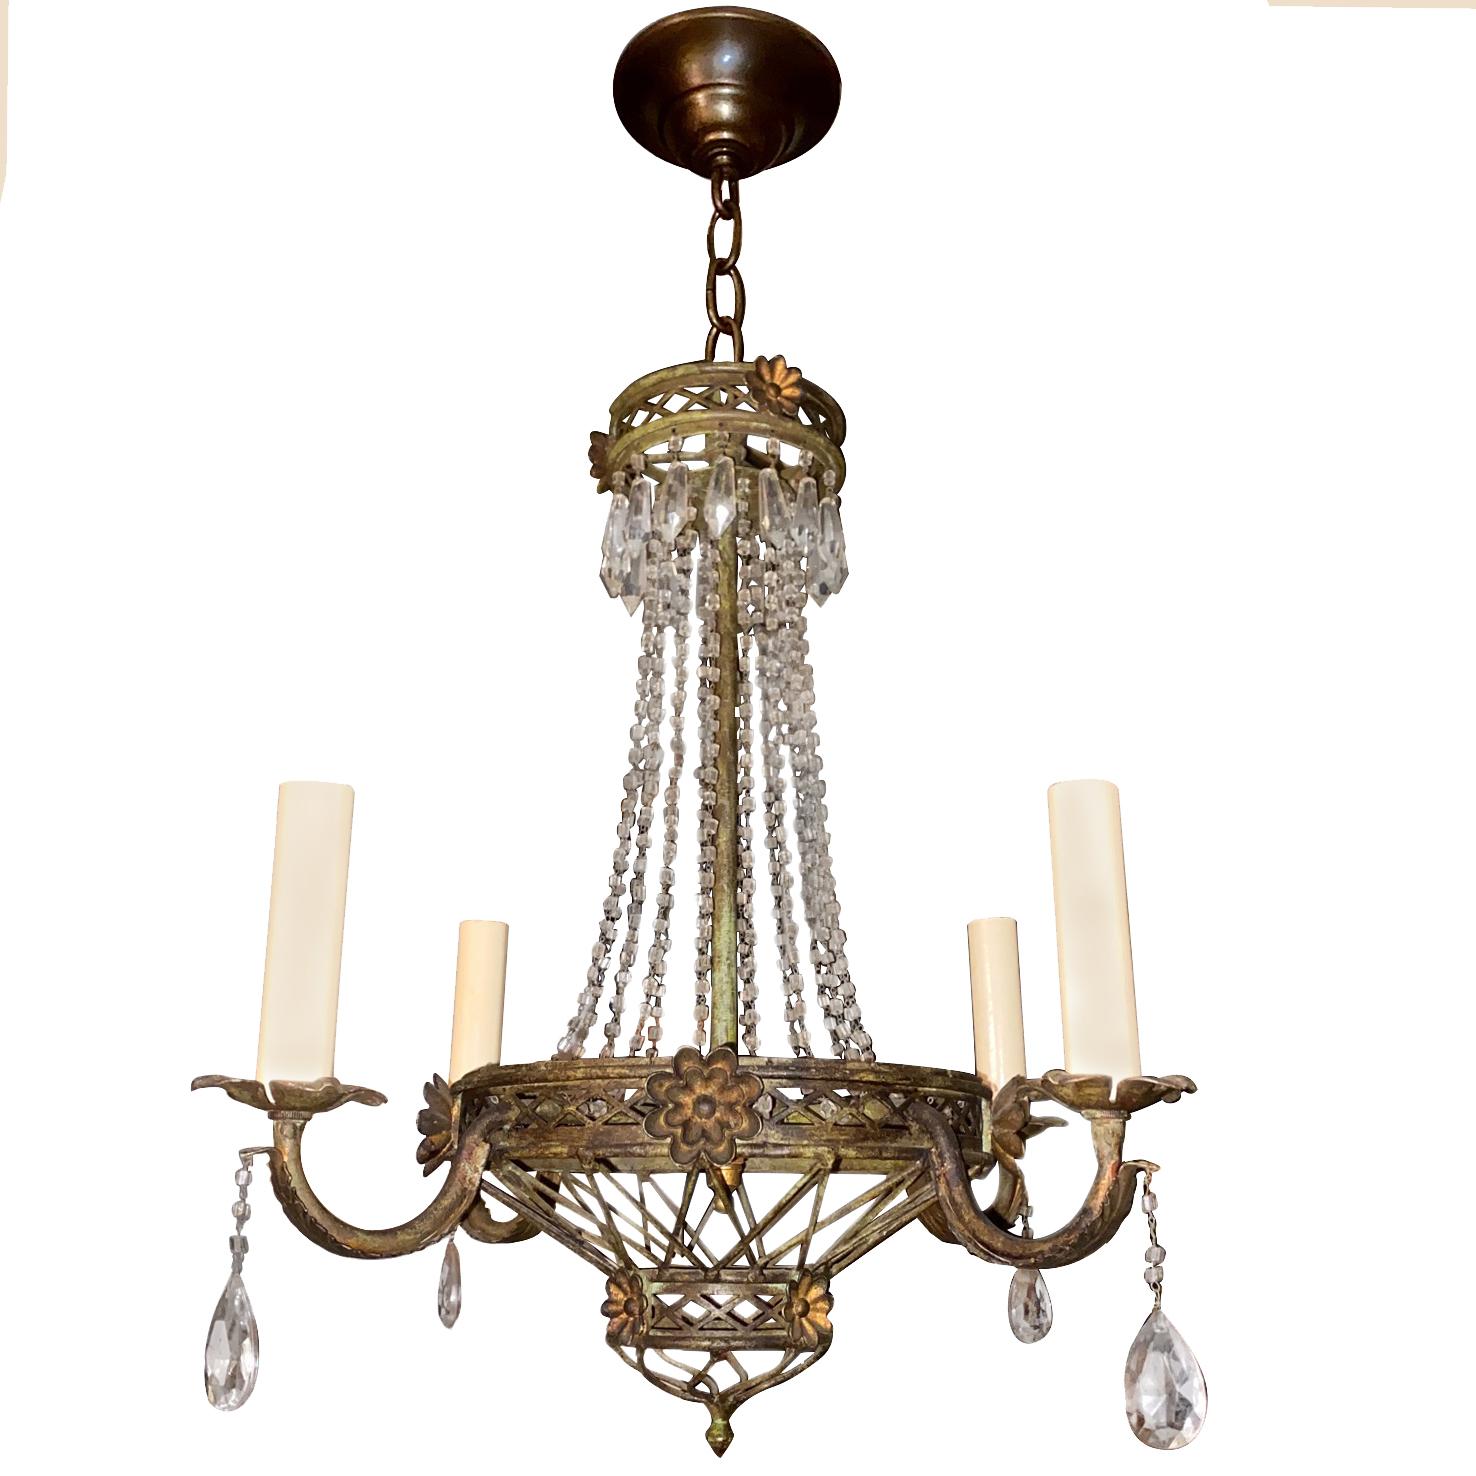 A circa 1950s French painted tole chandelier with crystal drops.

Measurements:
Present drop 24